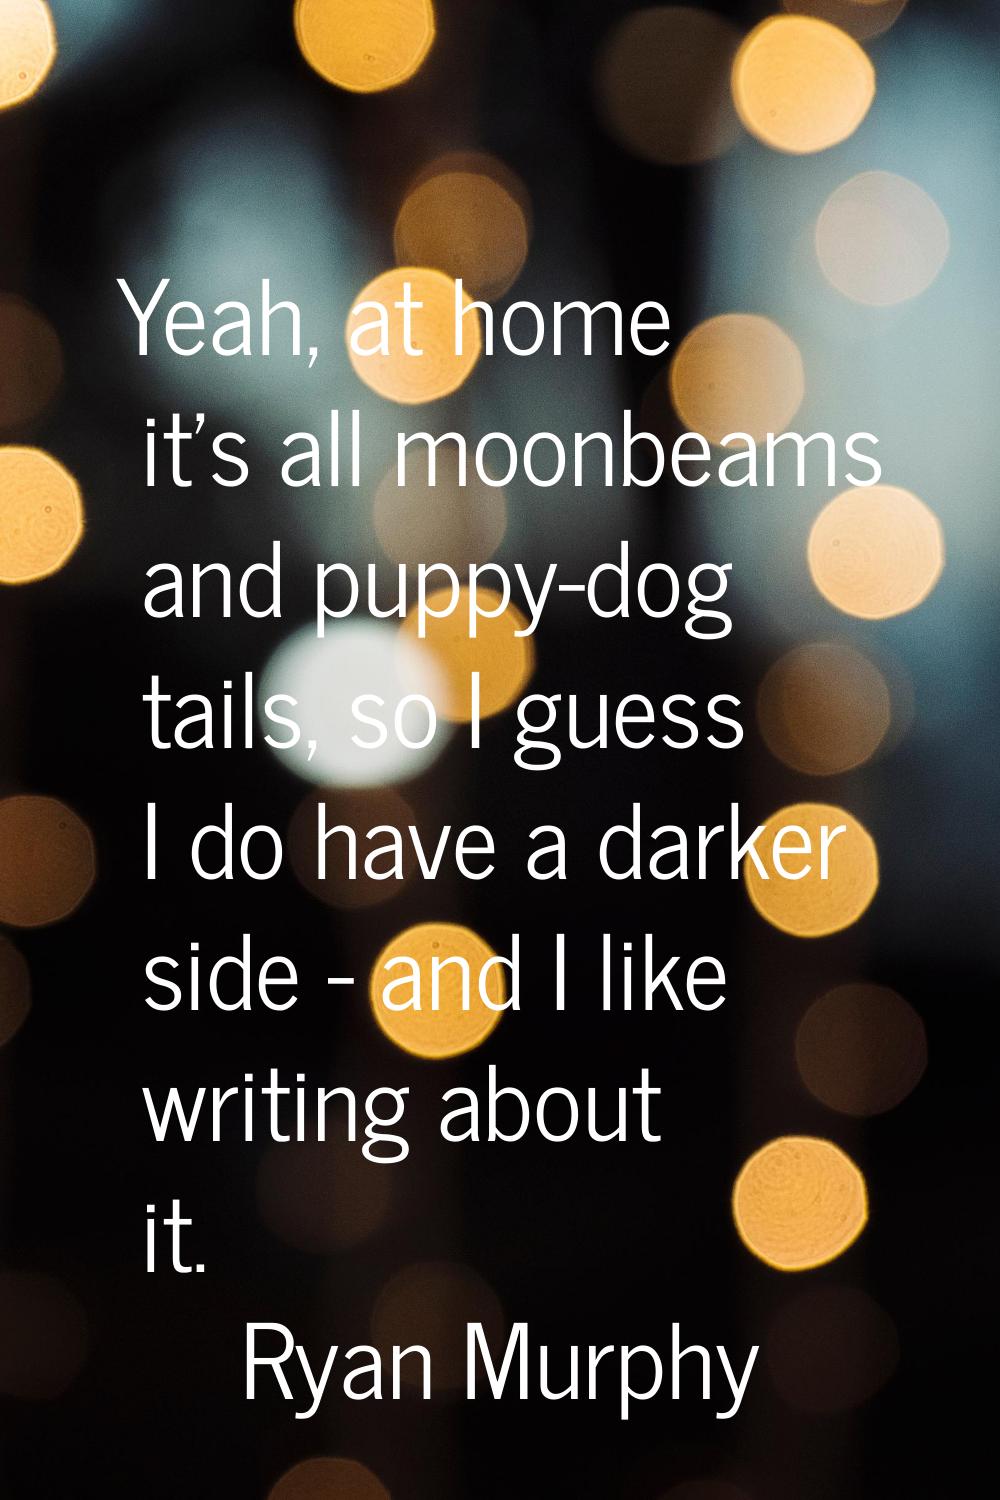 Yeah, at home it's all moonbeams and puppy-dog tails, so I guess I do have a darker side - and I li